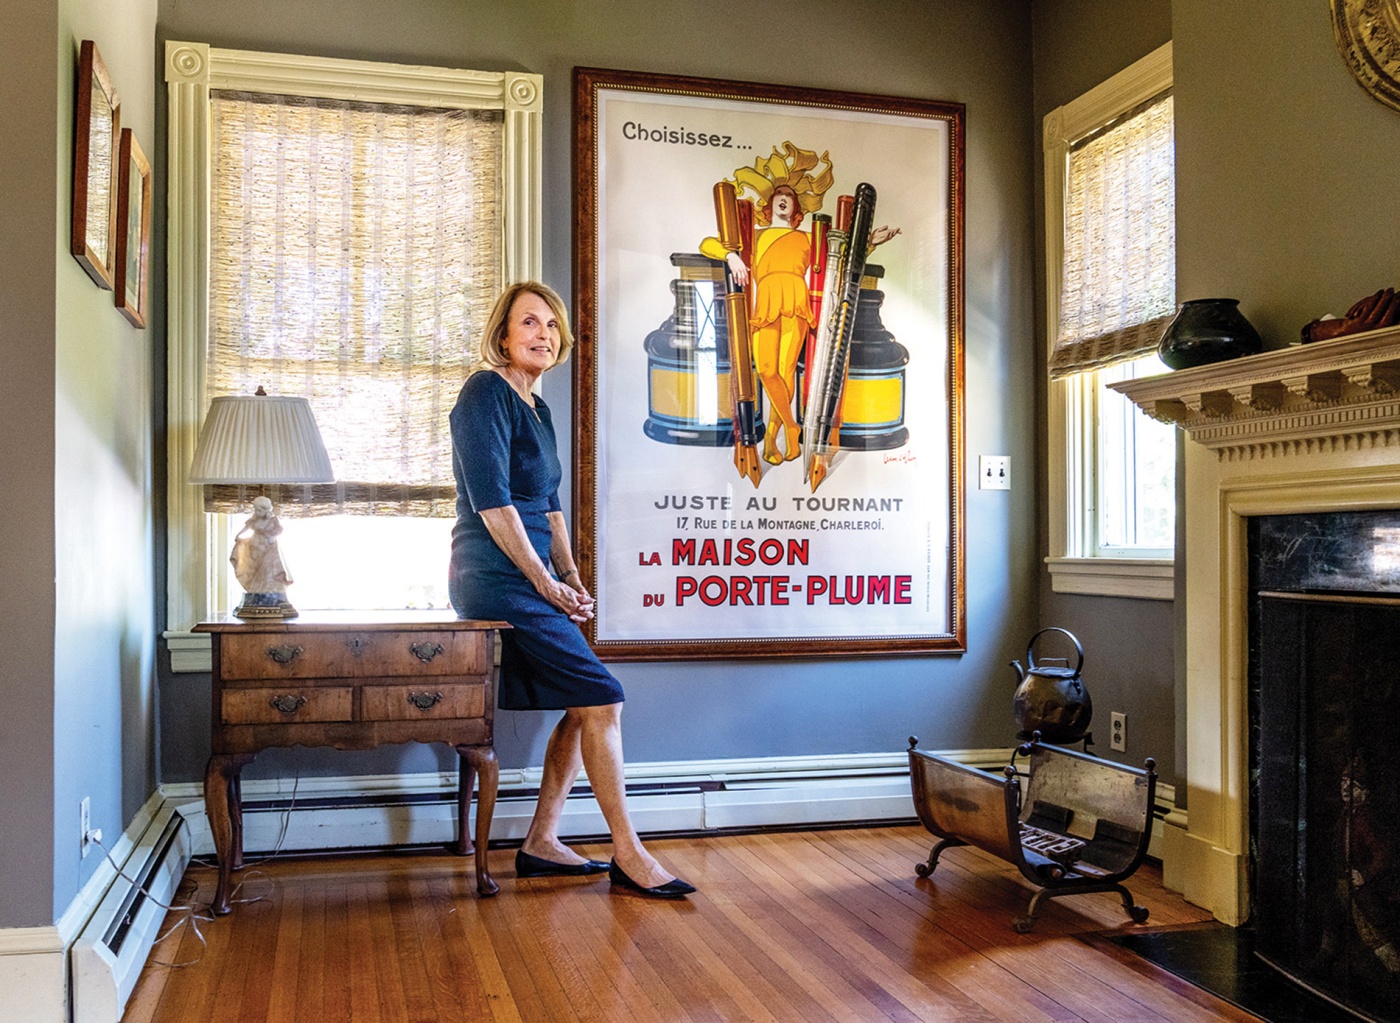 Image of Tracy Breton in her home leaning on a table with a fireplace in the foreground.